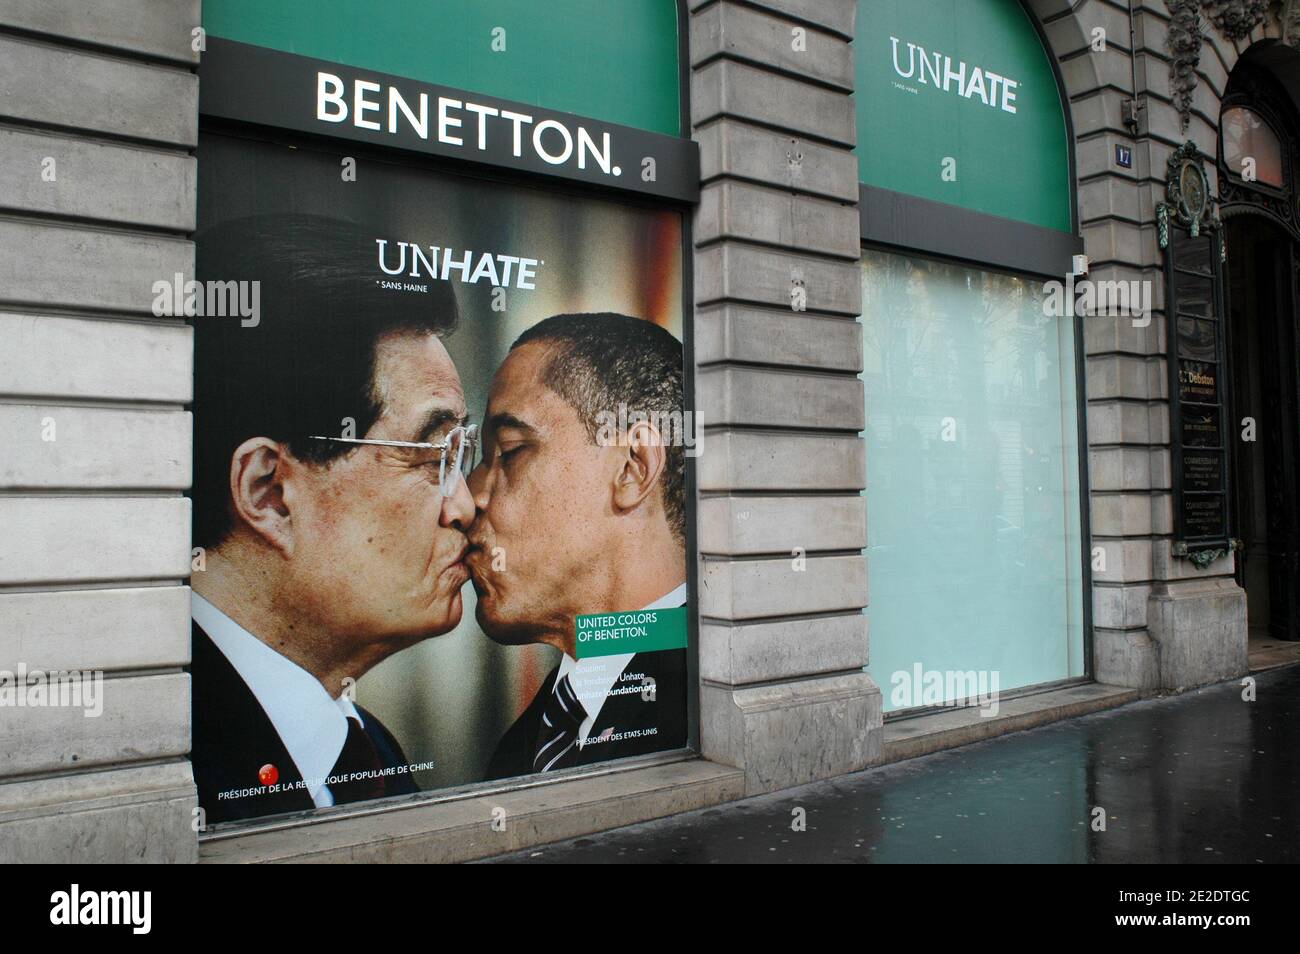 Posters from new Benetton's ad campaign 'Unhate' are on display on it's  flagship store windows, Place de l'Opera in Paris, France, November 17,  2011. They show various pictures of political opponents kissing.